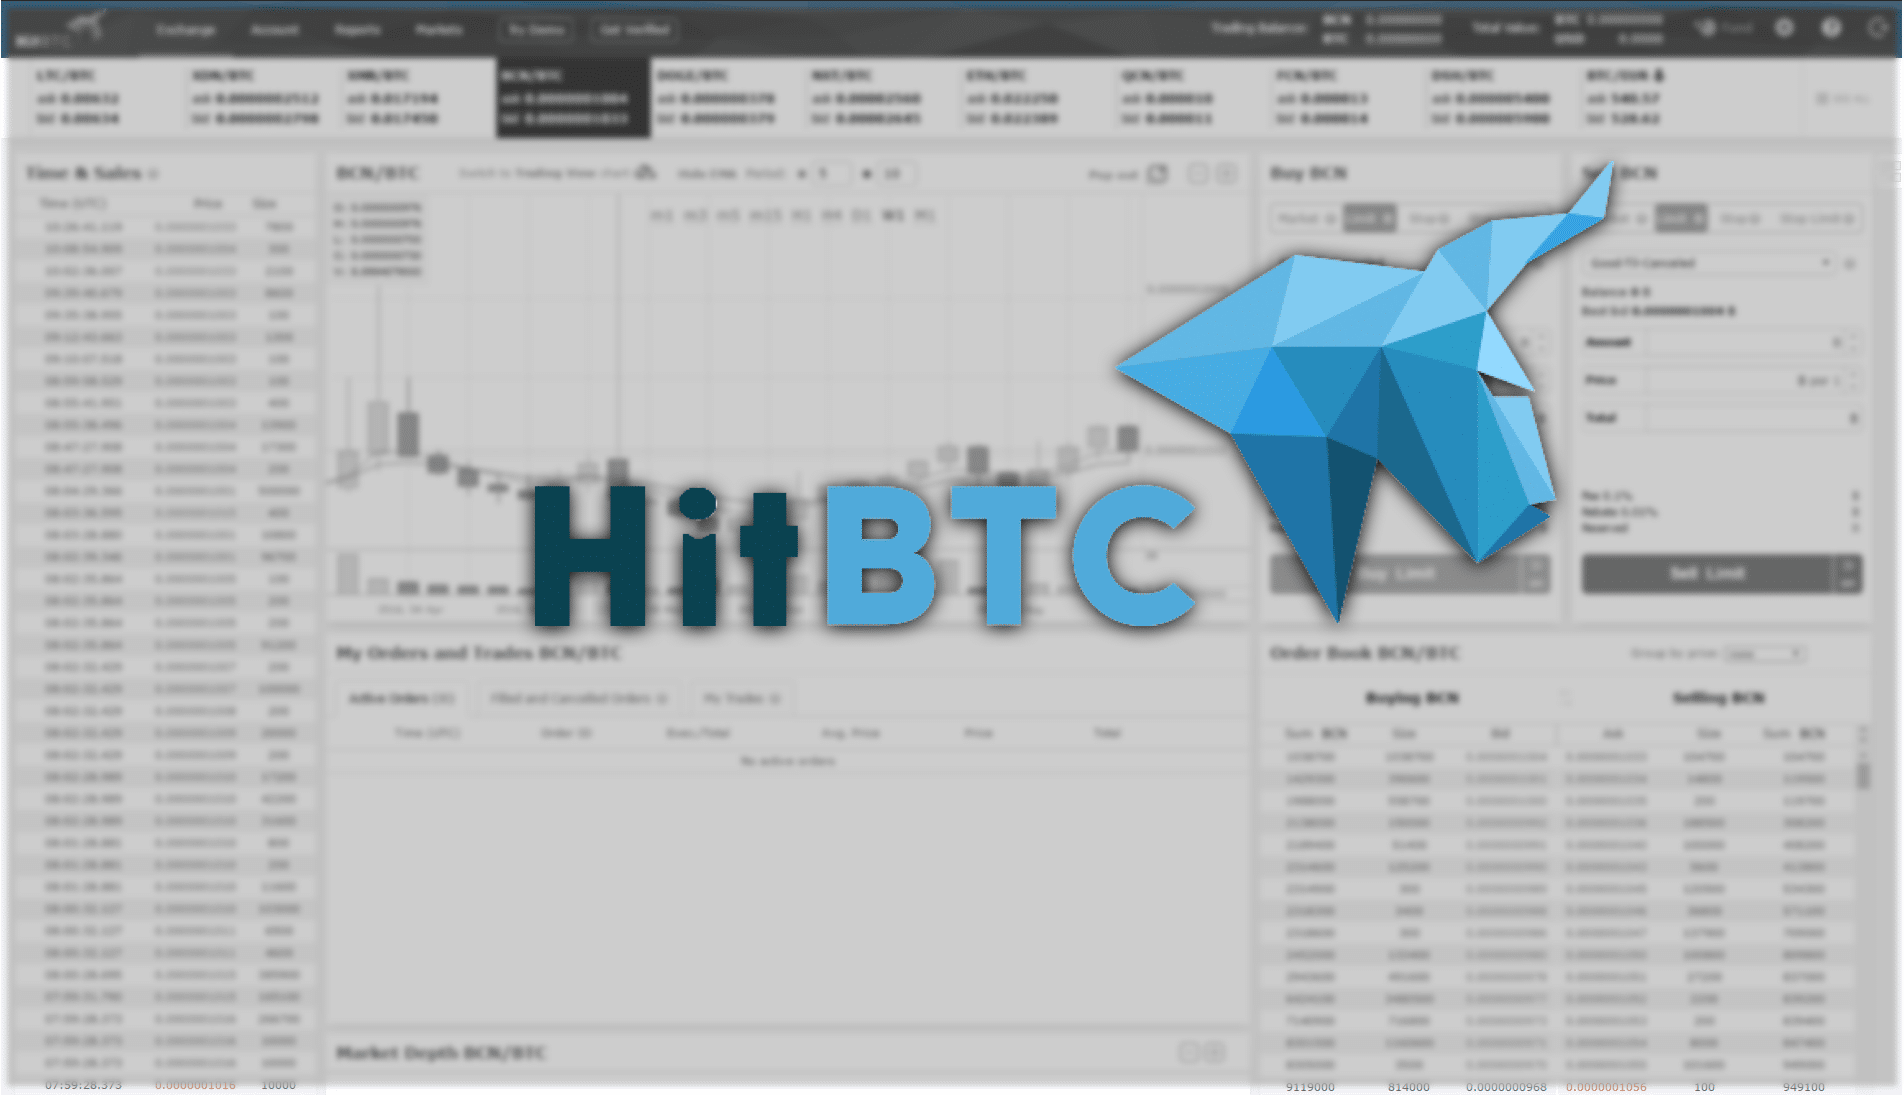 HitBTC Review: Is HitBTC Safe to Use? - CoinCentral